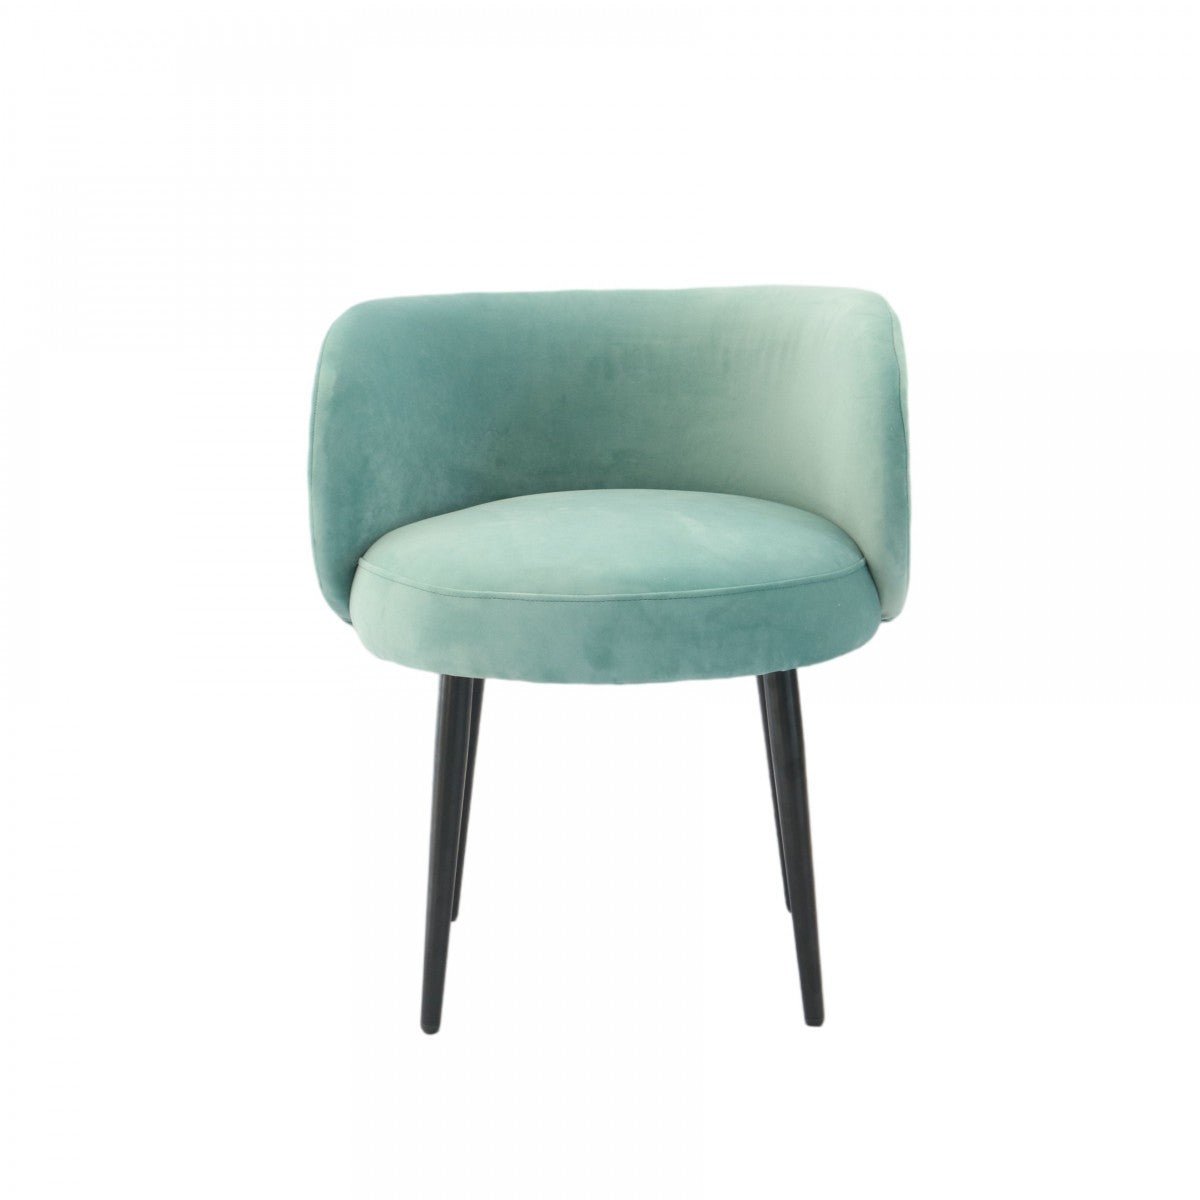 24" Teal Velvet And Black Solid Color Arm Chair